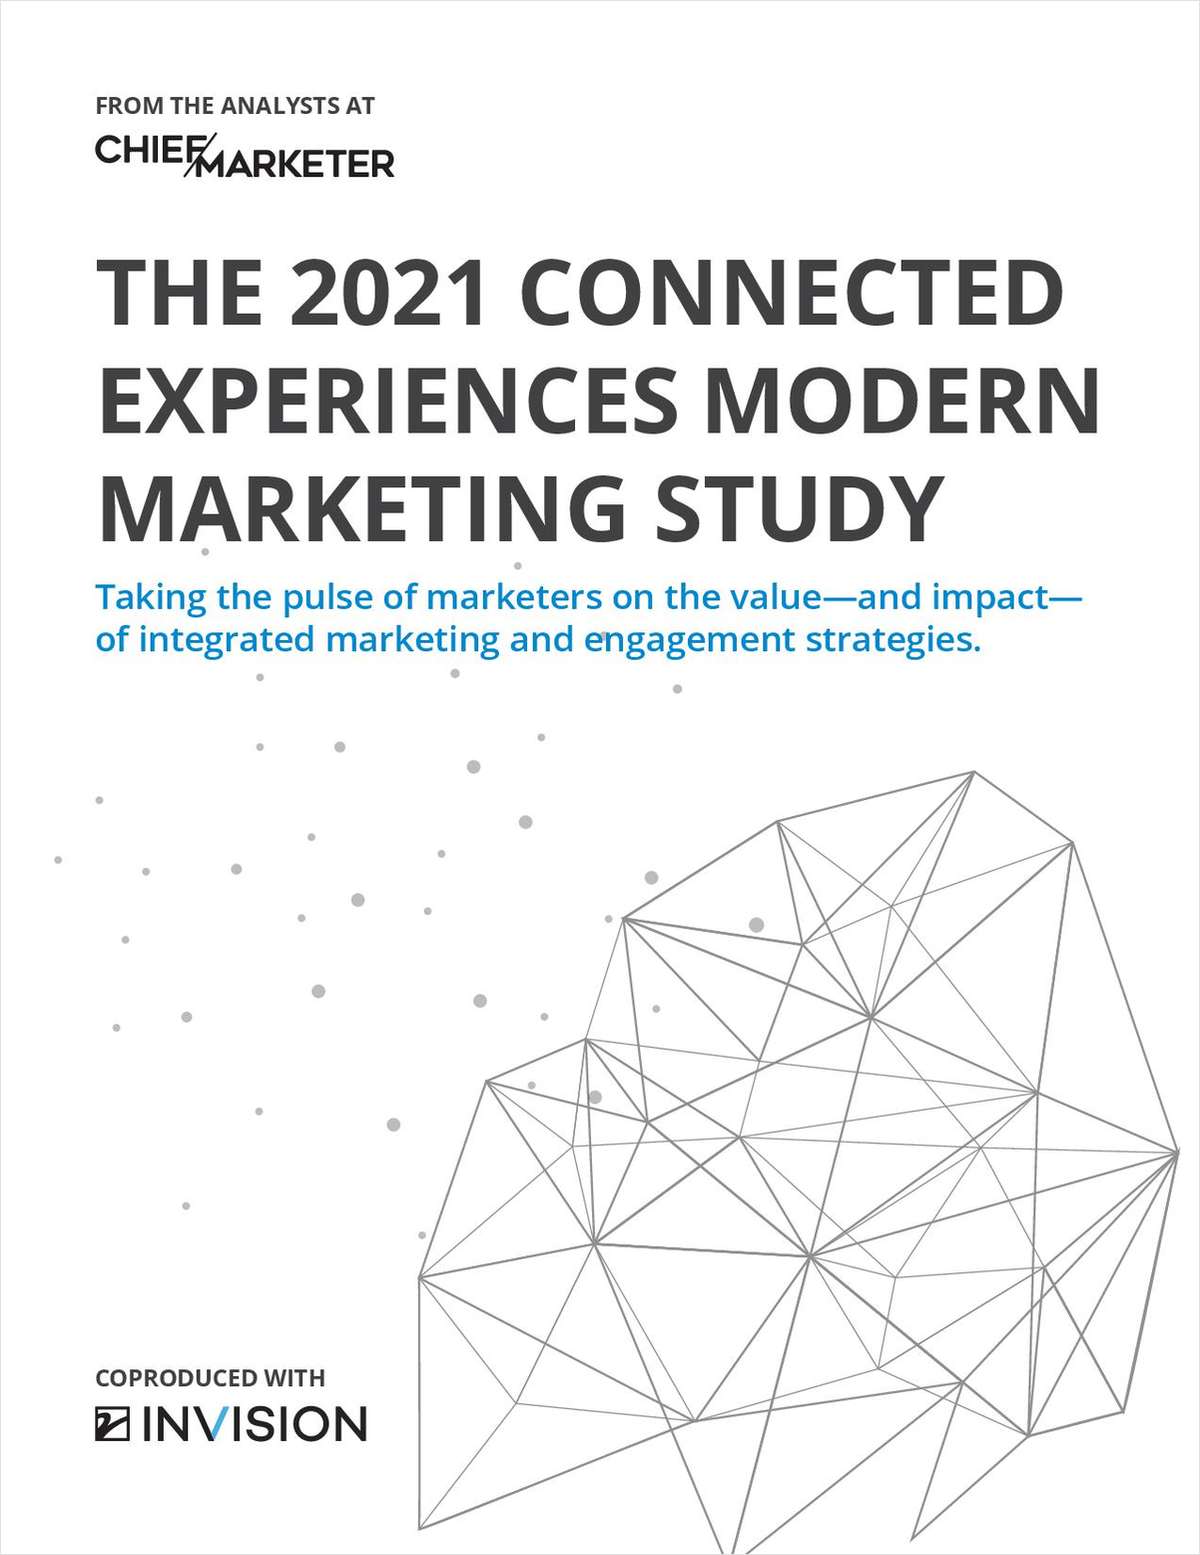 The 2021 Connected Experiences Modern Marketing Study